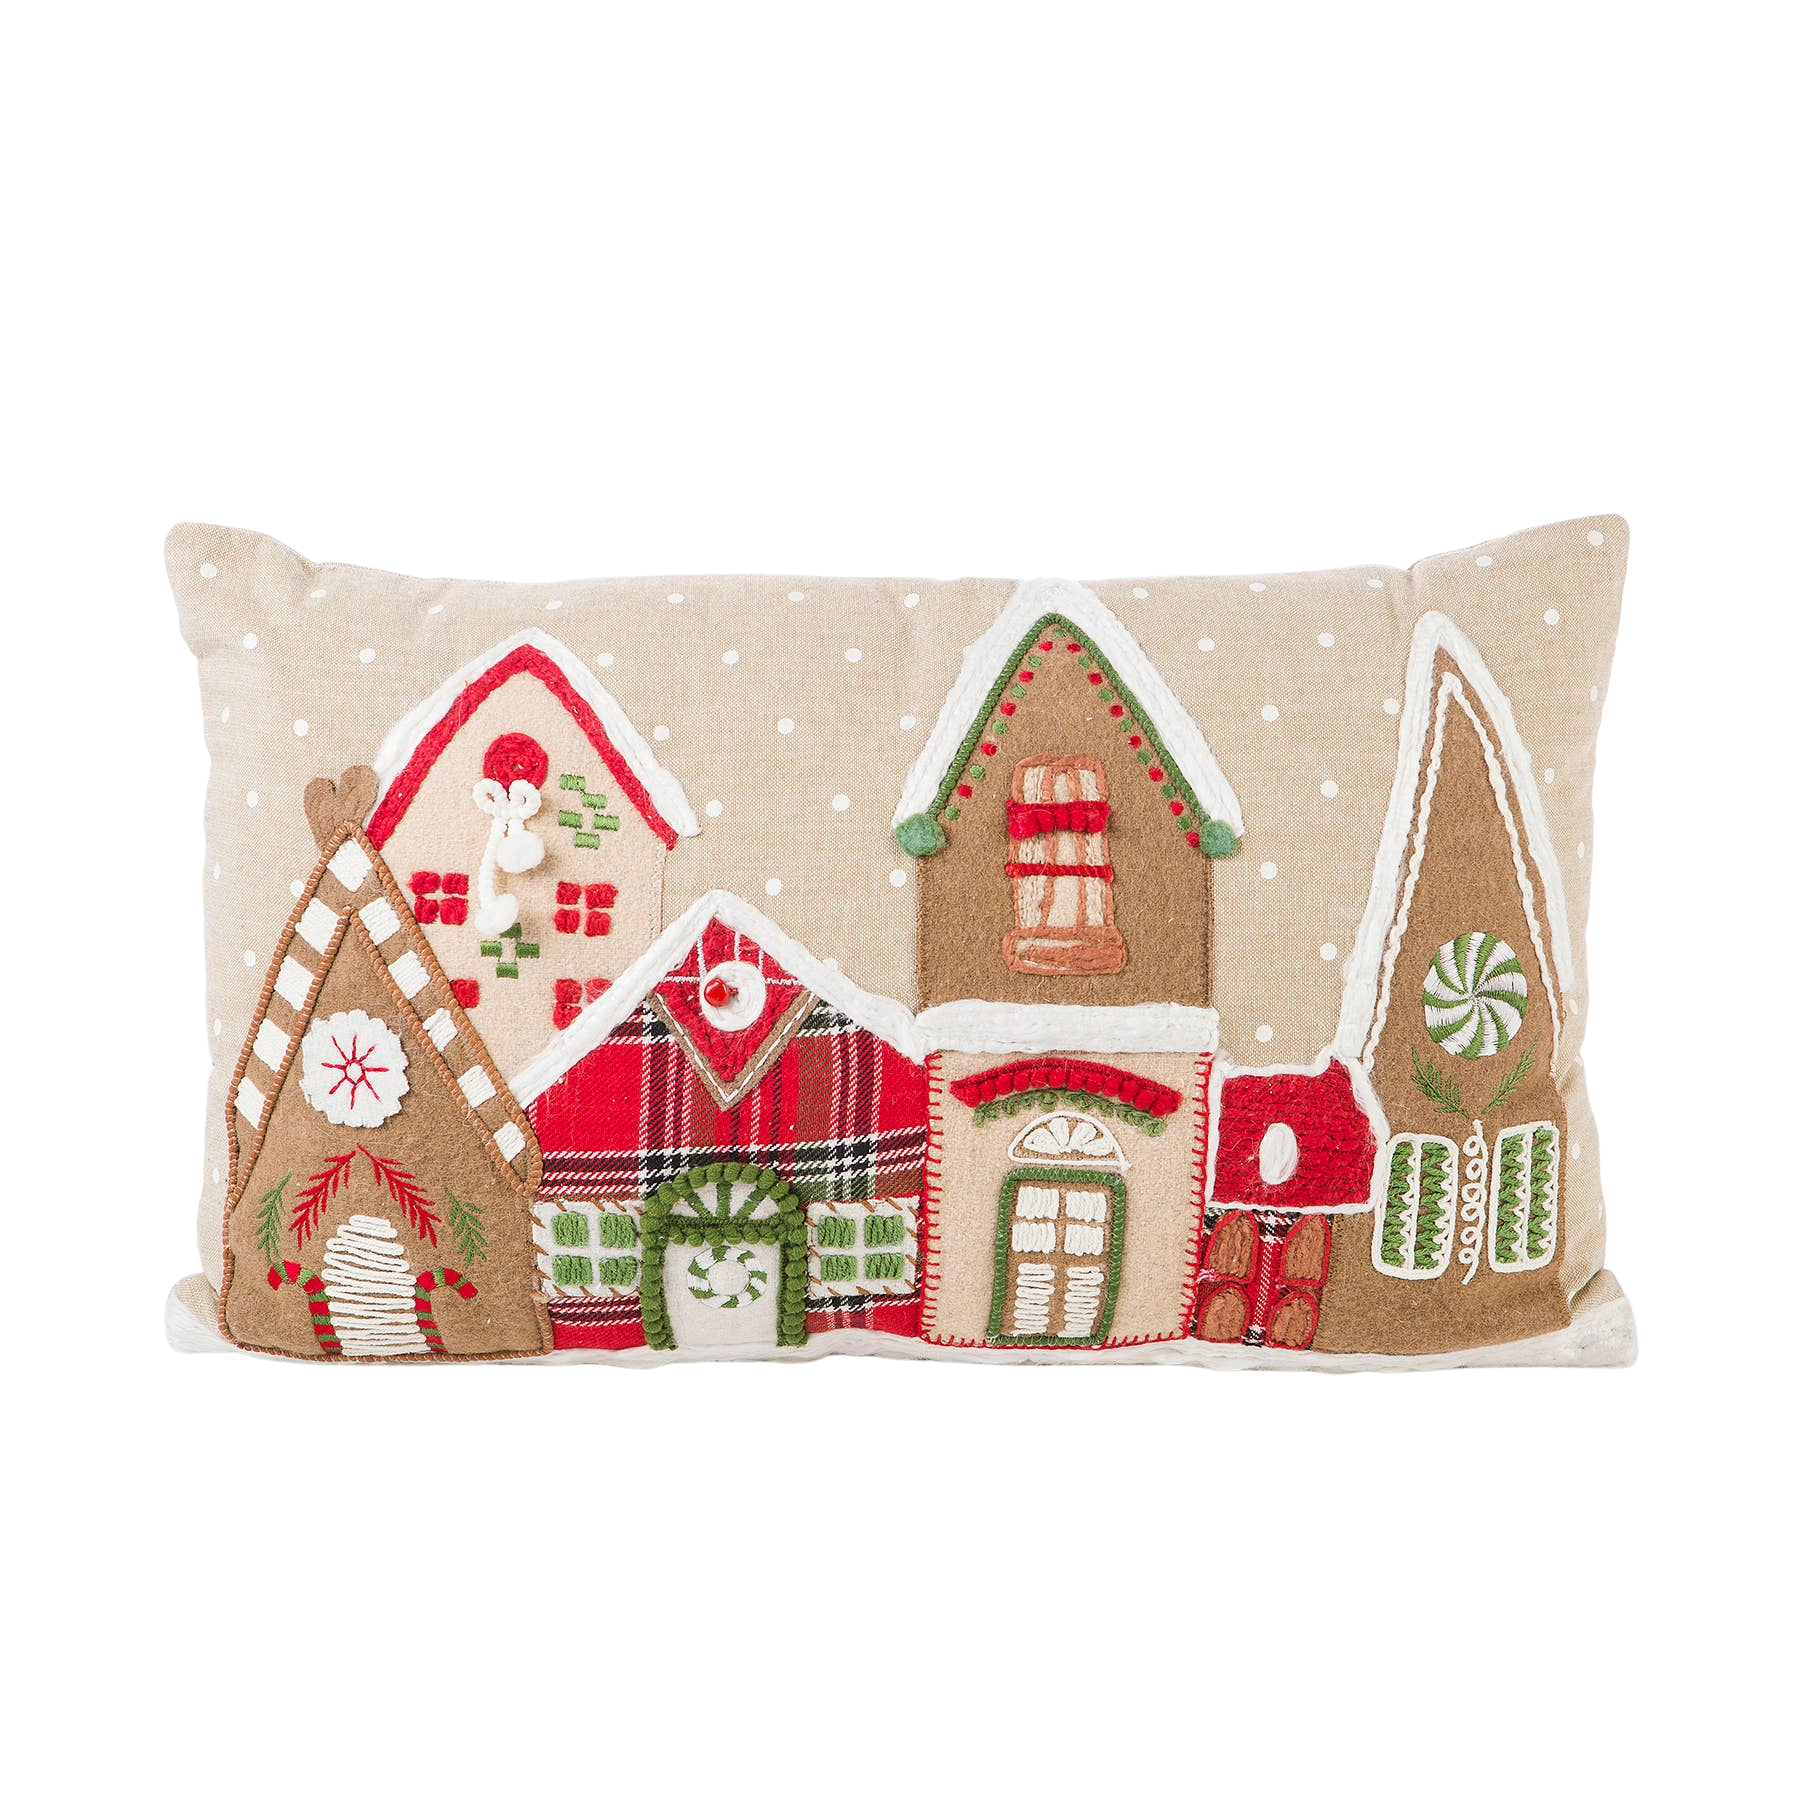 Vintage Inspired Embroidered Village Accent Pillow